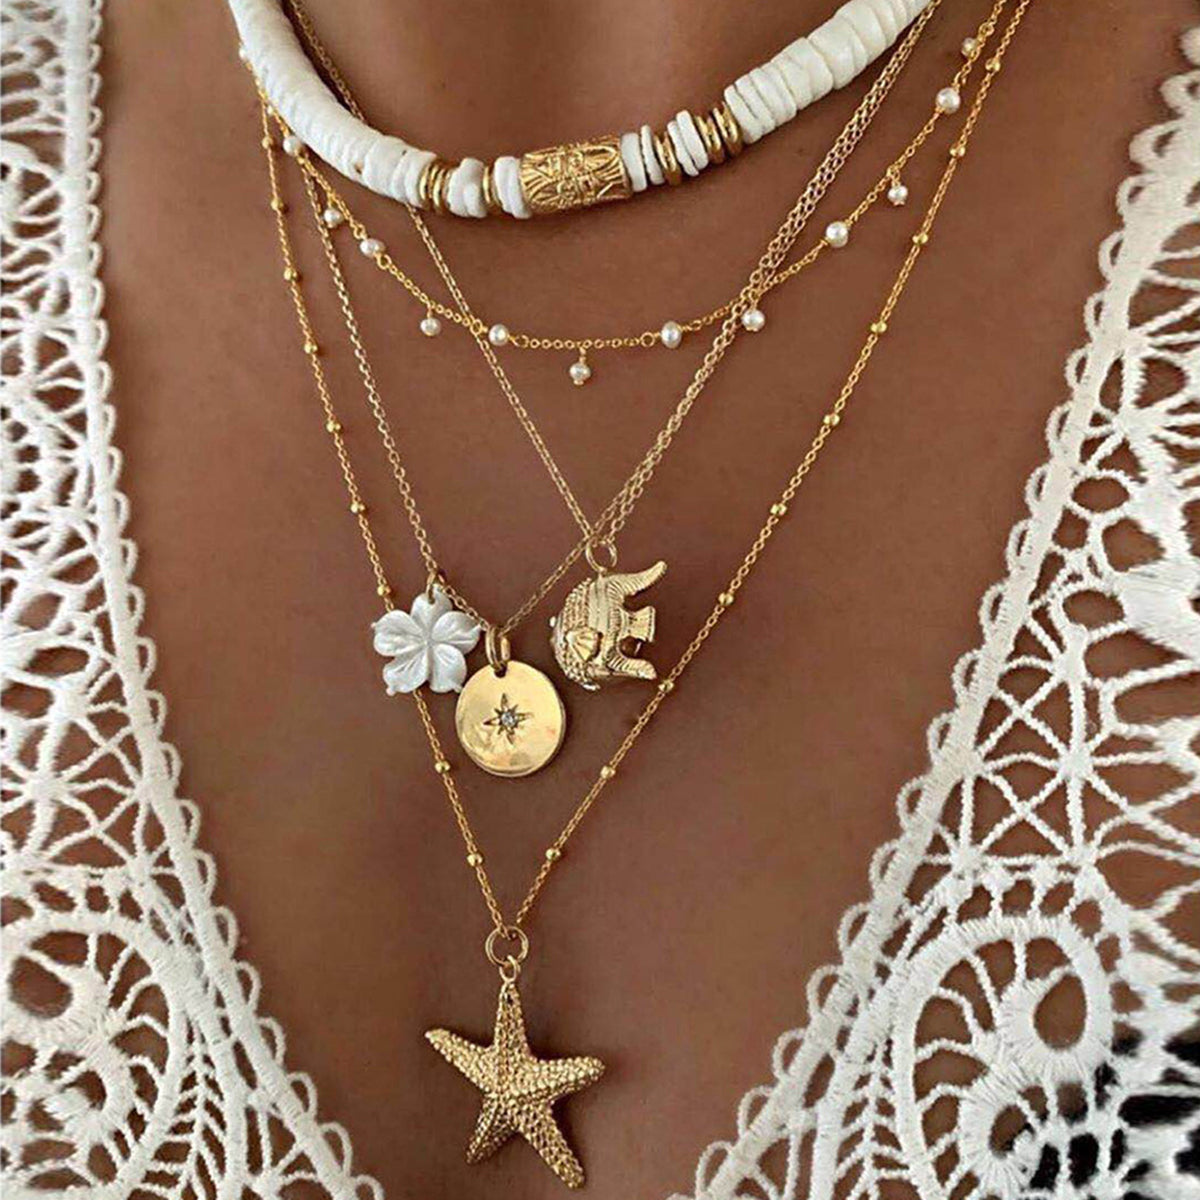 Star Floral Layered Charm Necklace